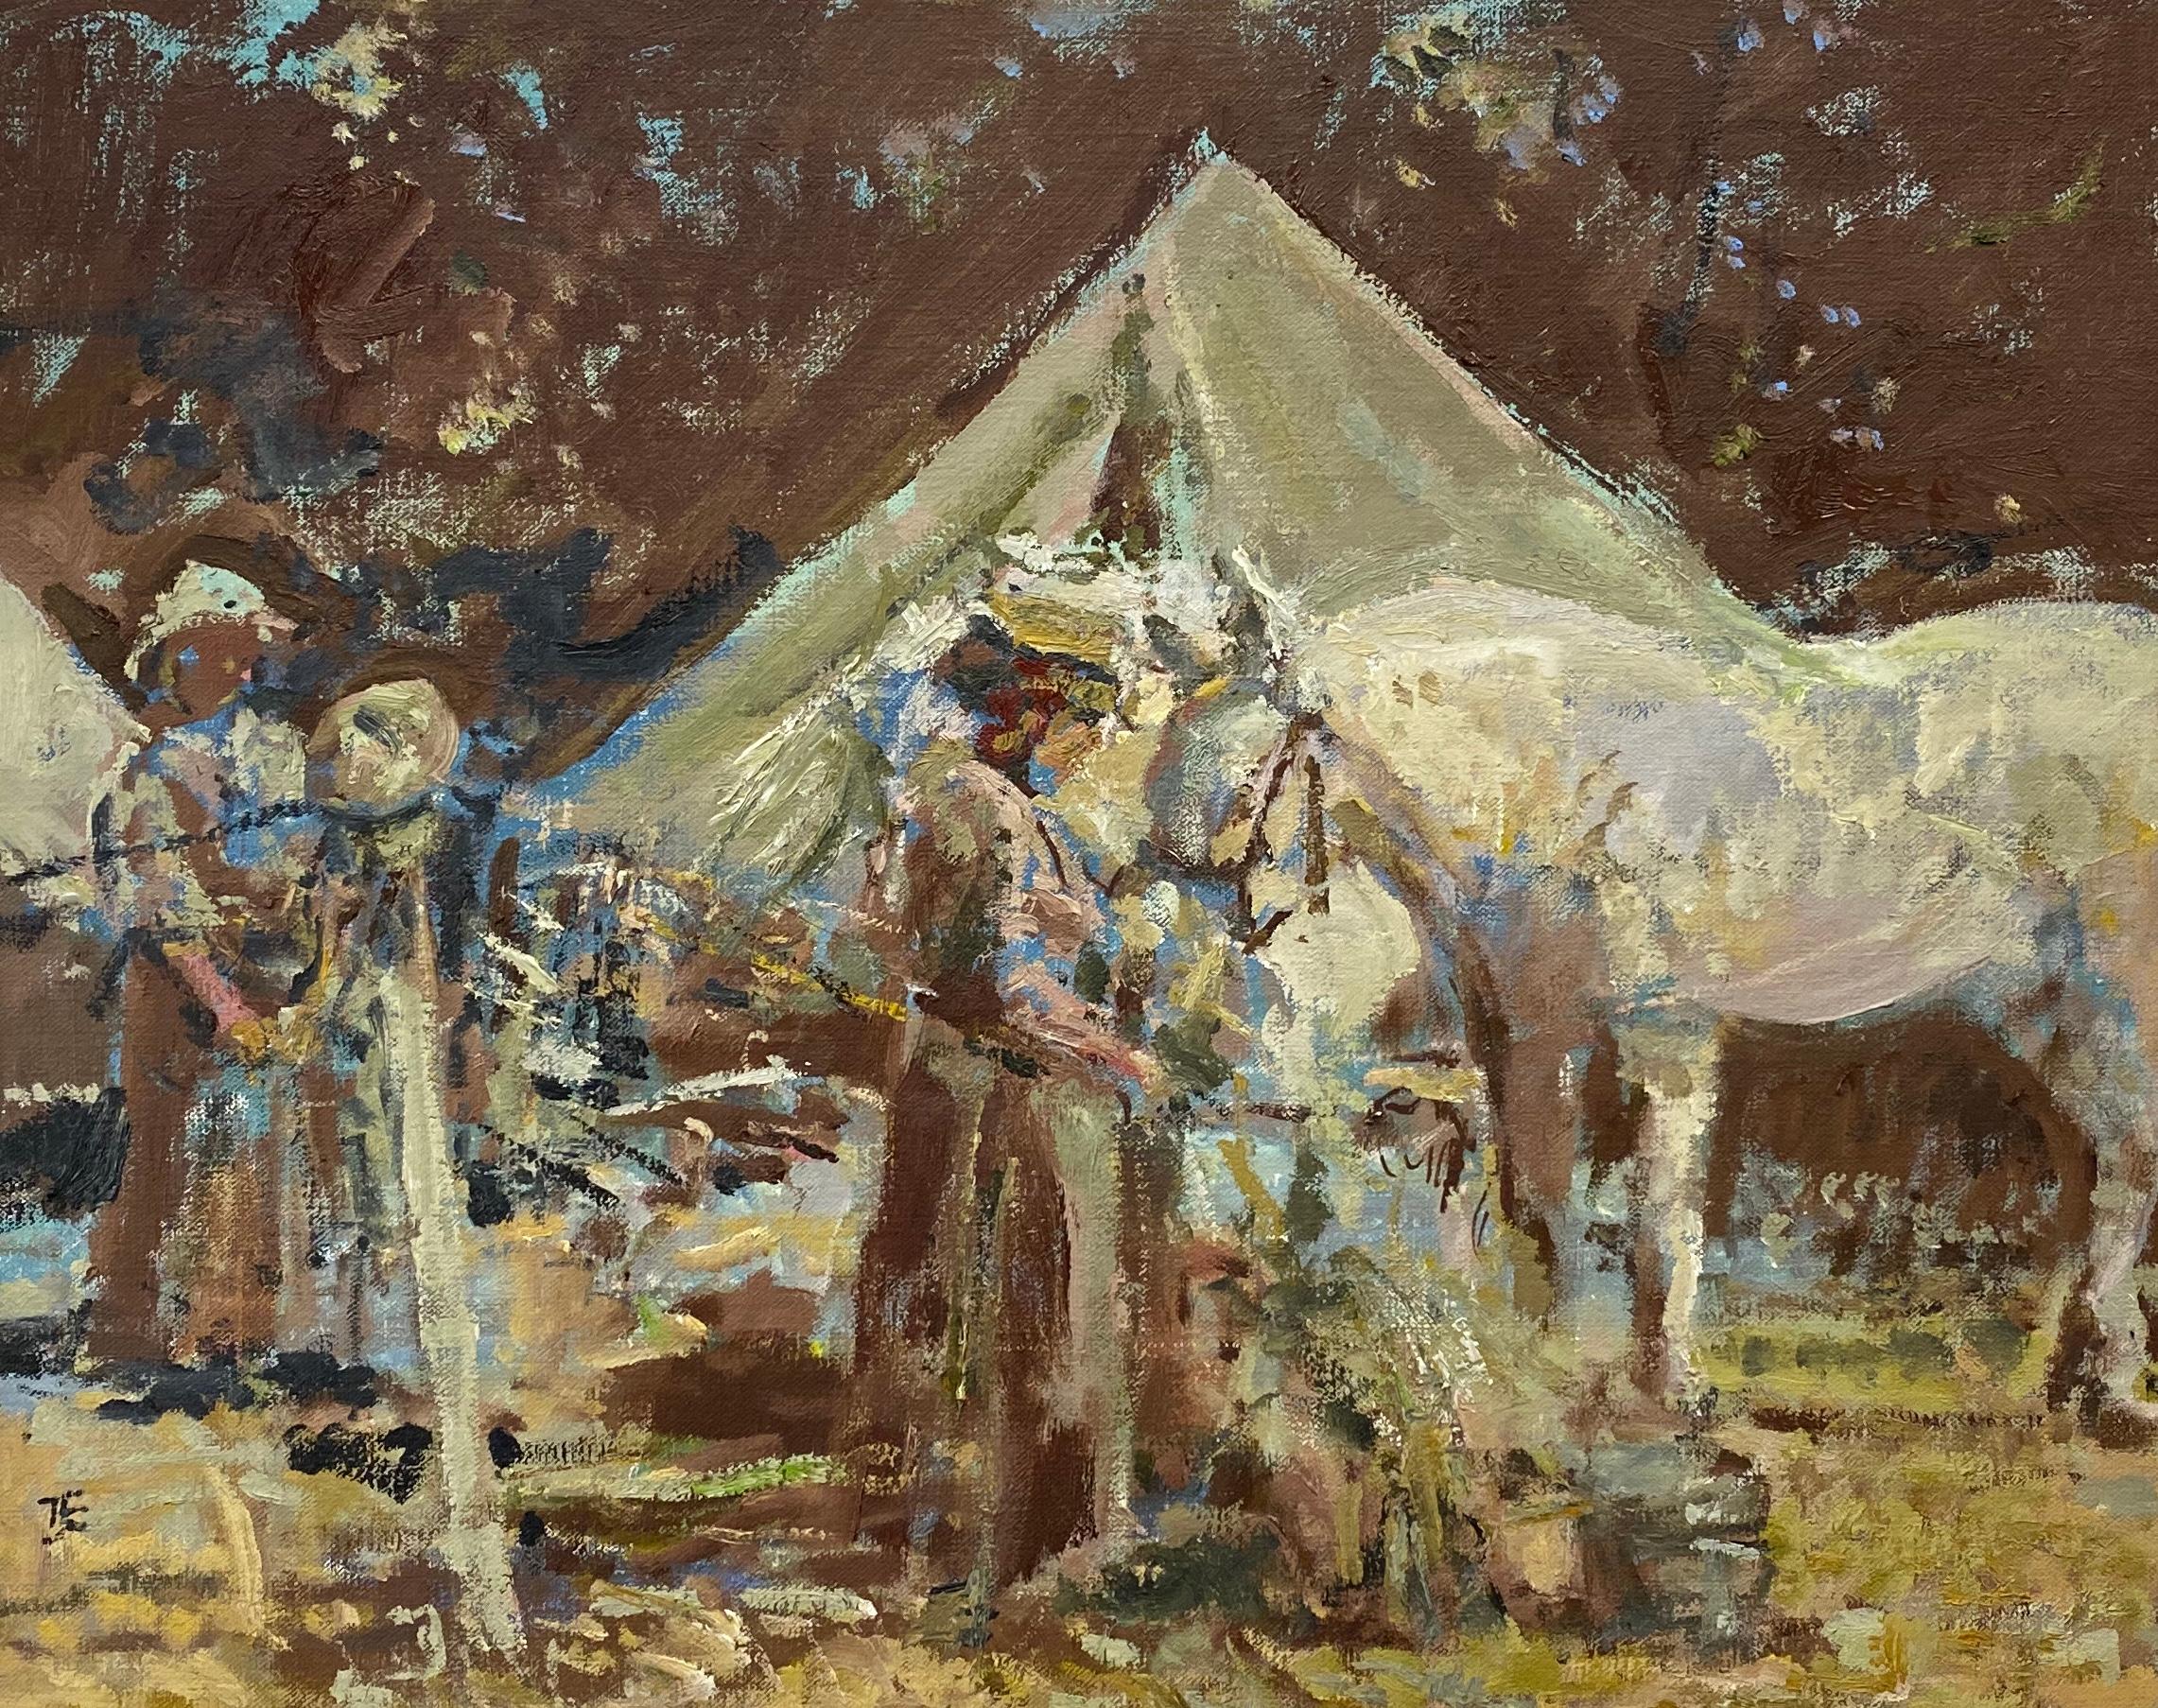 Tom Coates Animal Painting - At Camp - Horses in a landscape